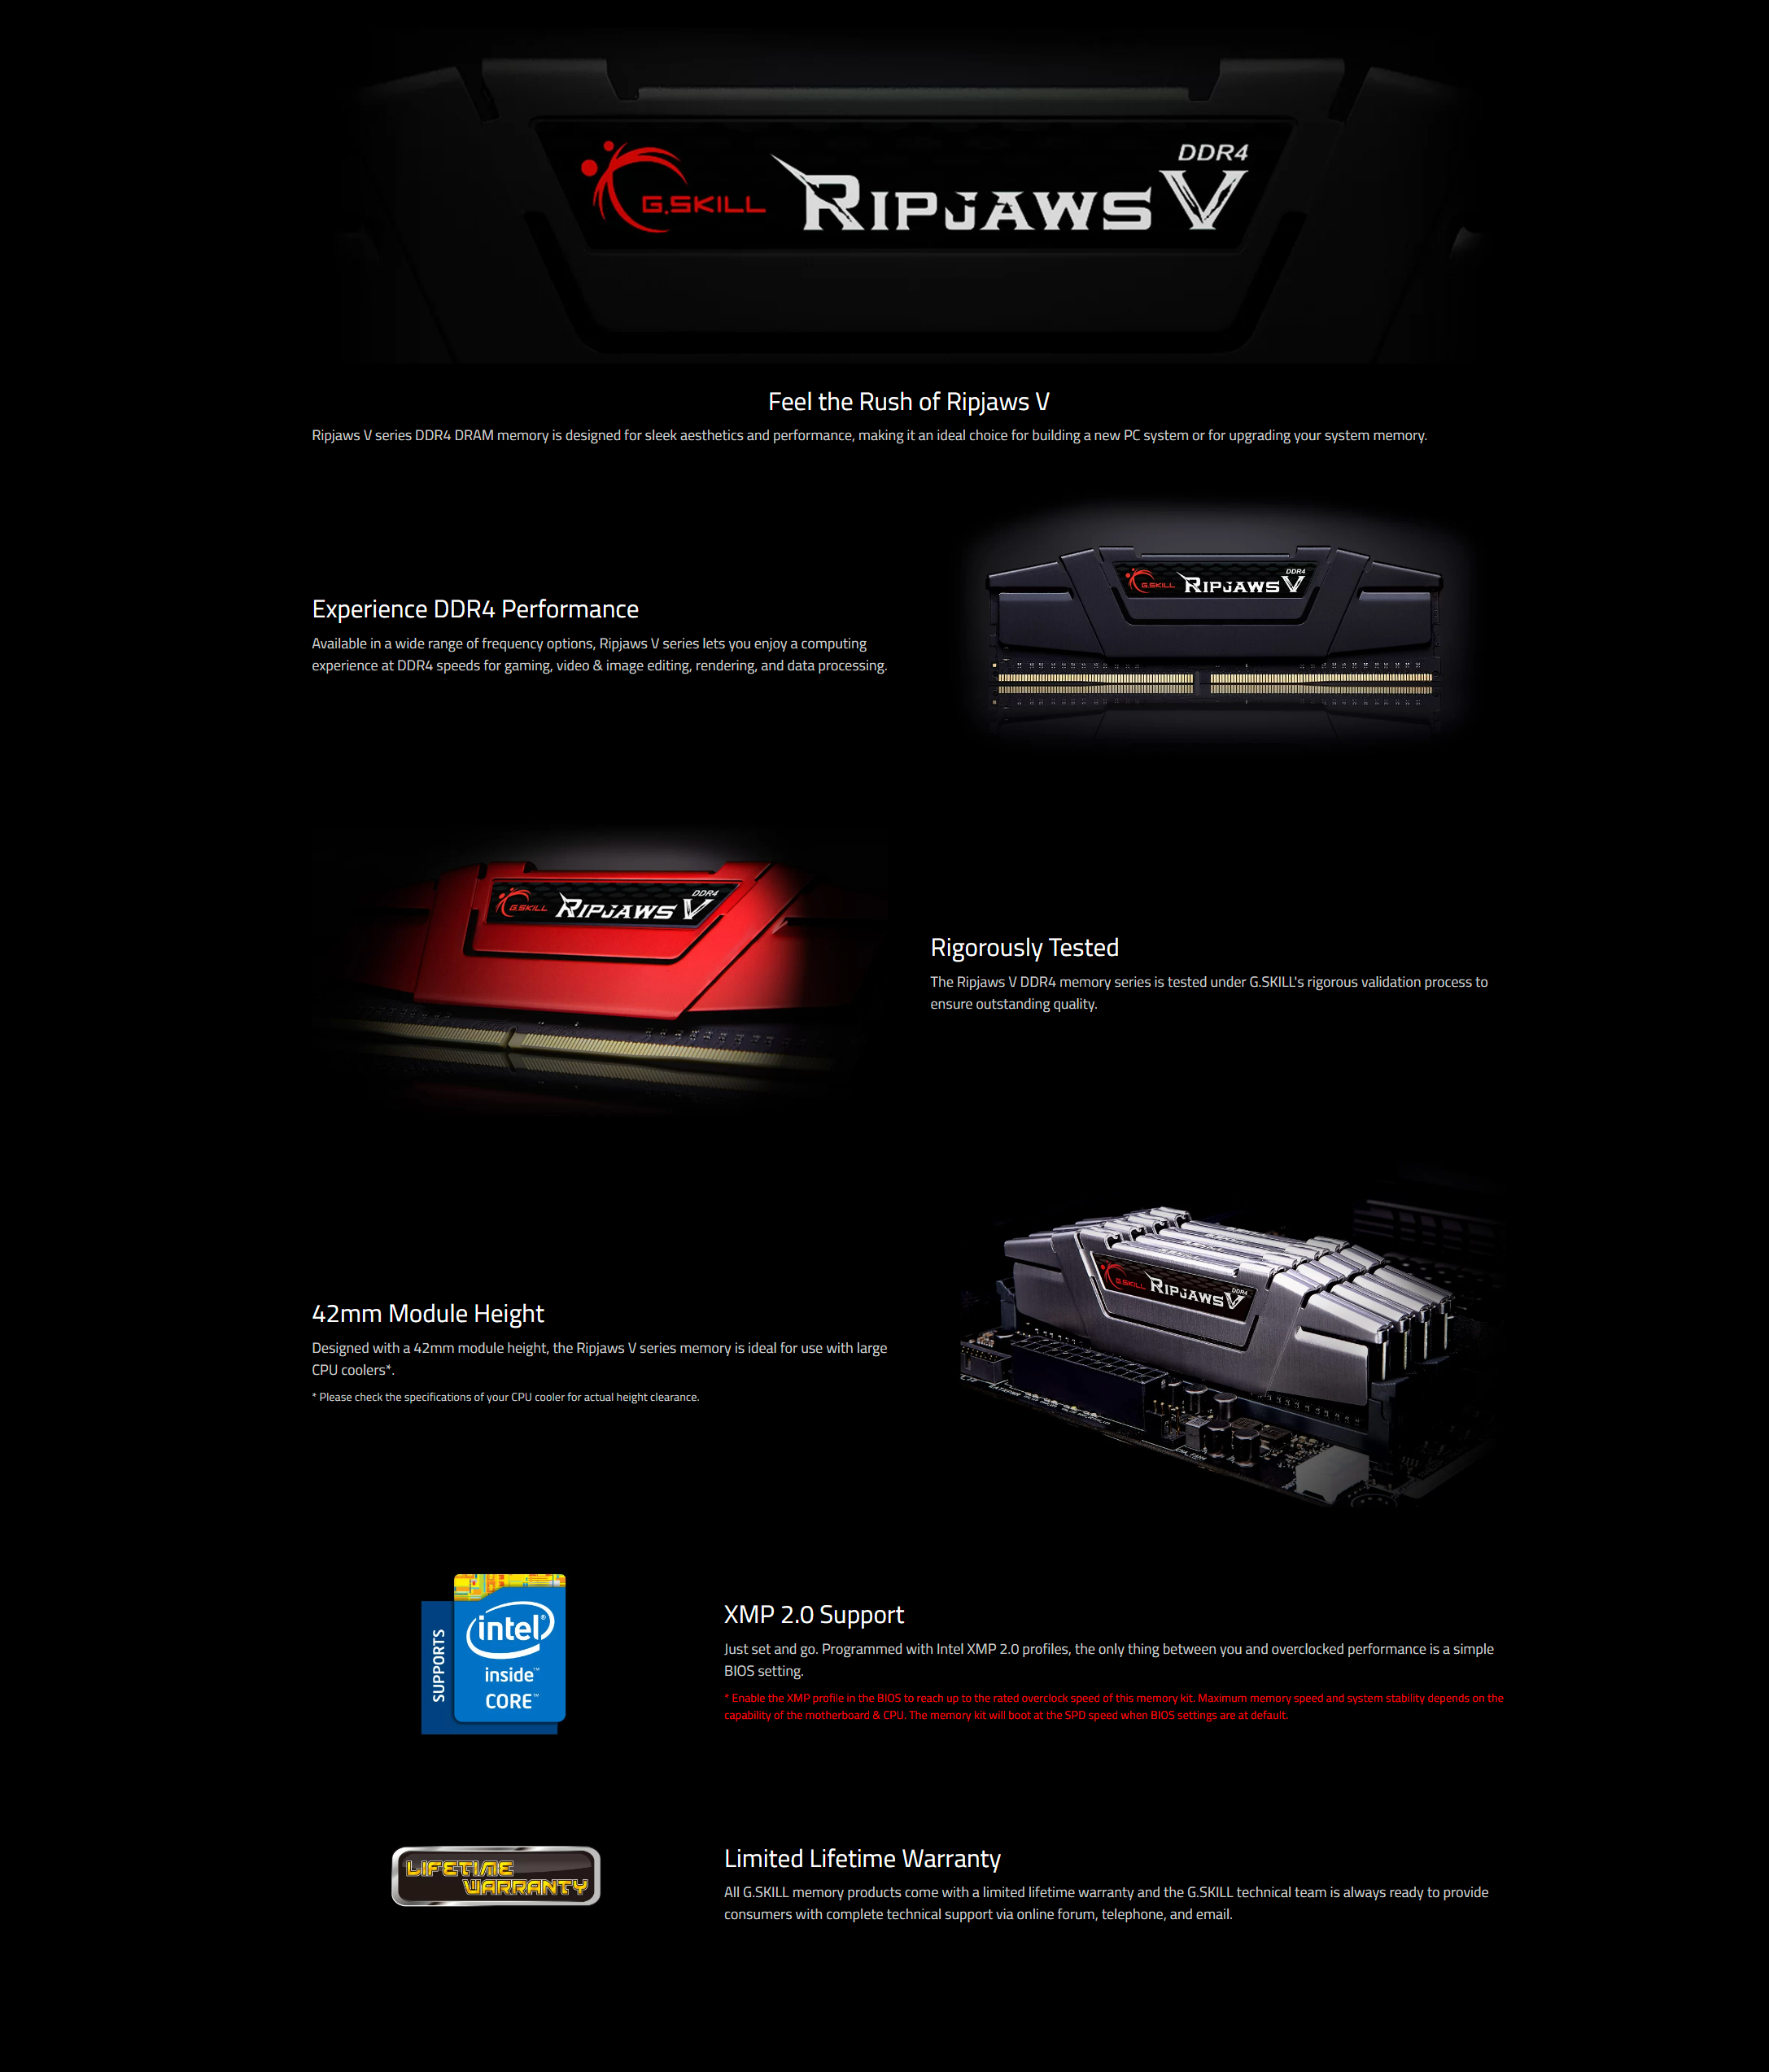 A large marketing image providing additional information about the product G.Skill 32GB Kit (2x16GB) DDR4 Ripjaws V C18 3600MHz - Black - Additional alt info not provided